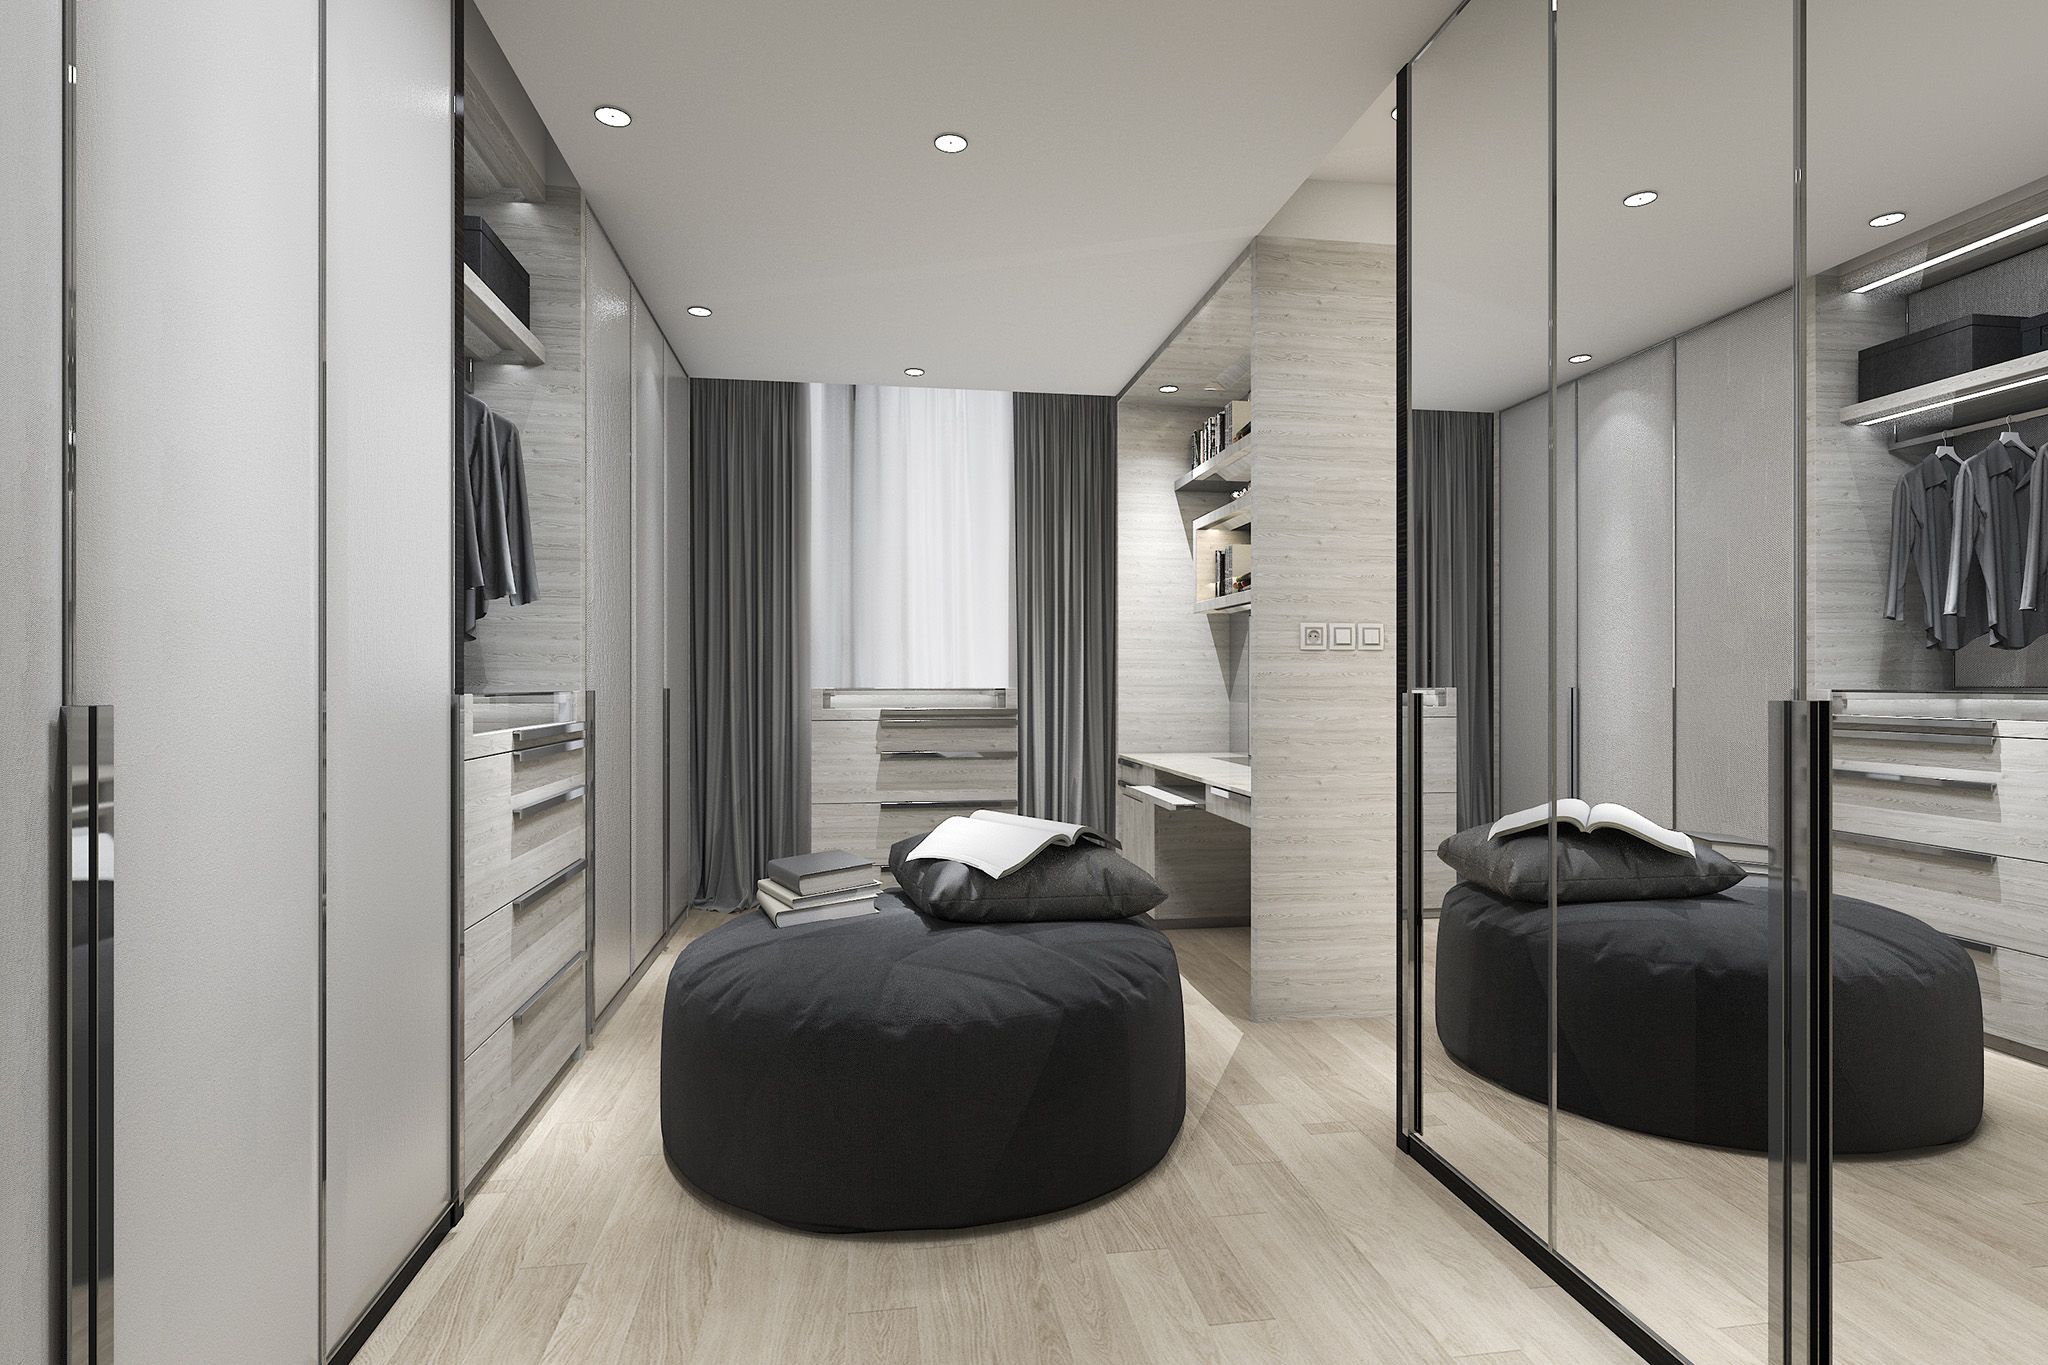 Fitted Wardrobes Ideas | Elegant Mirrored Wardrobe Designs Within Mirrored Wardrobes (View 15 of 15)